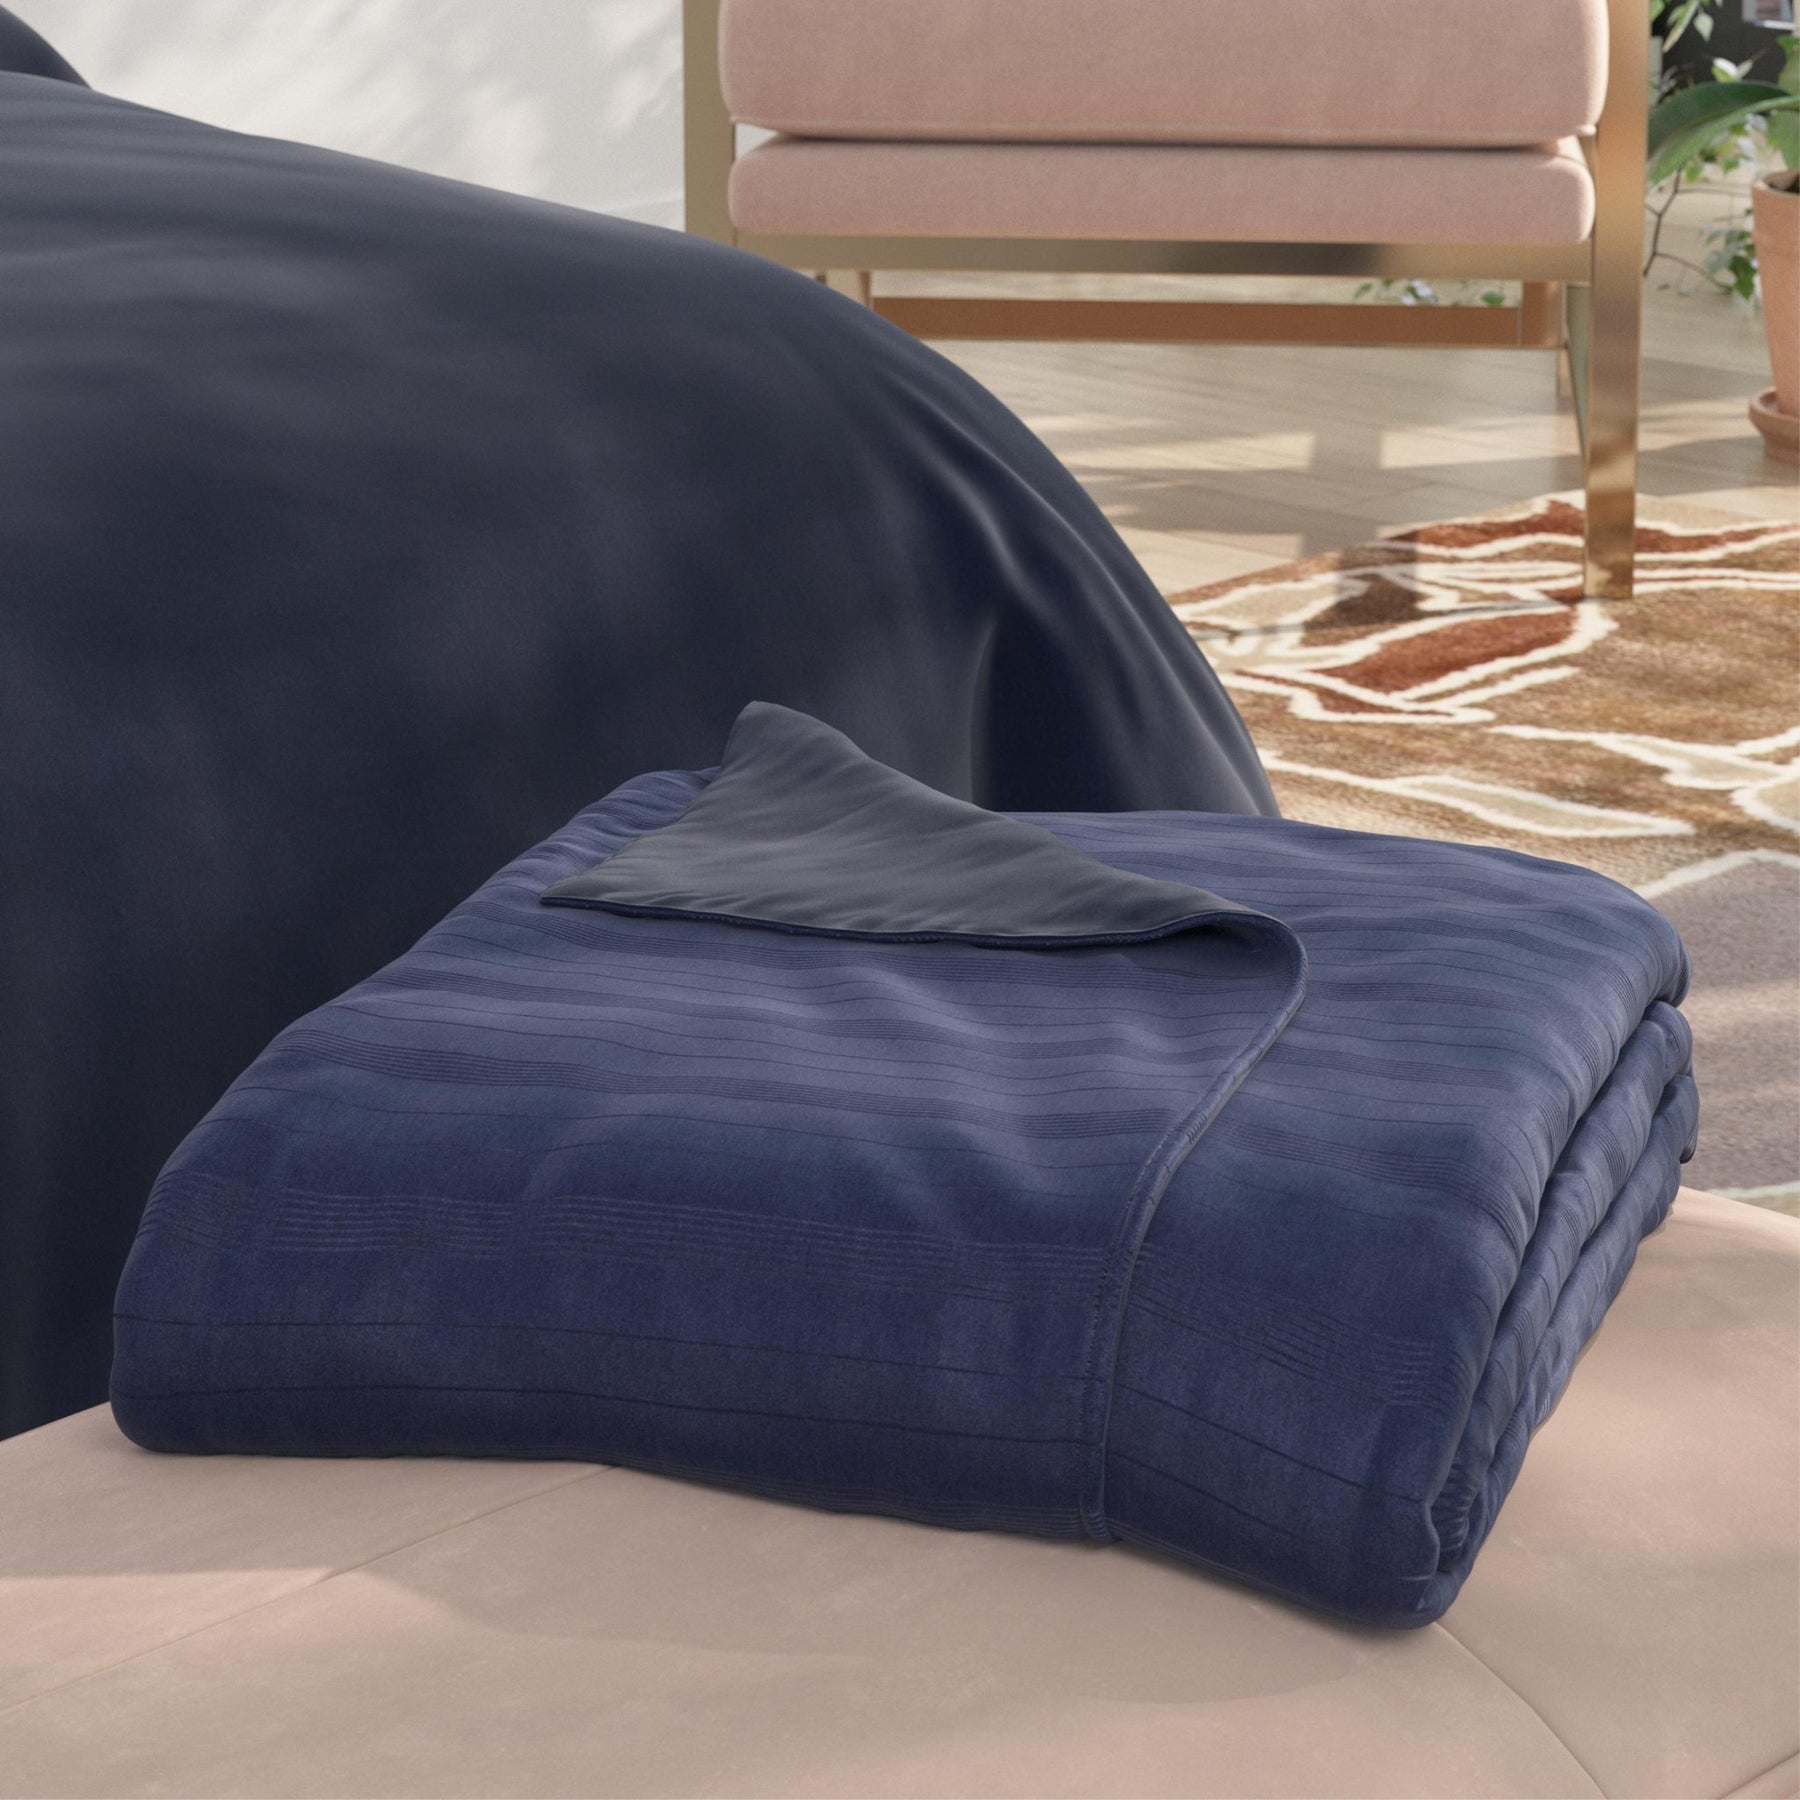 Image of a neatly folded Midnight/Celestial  Duvet Cover + Cooling with the Midnight side facing up and a corner of the Celestial side folded back on a tan stool at the foot of a bed